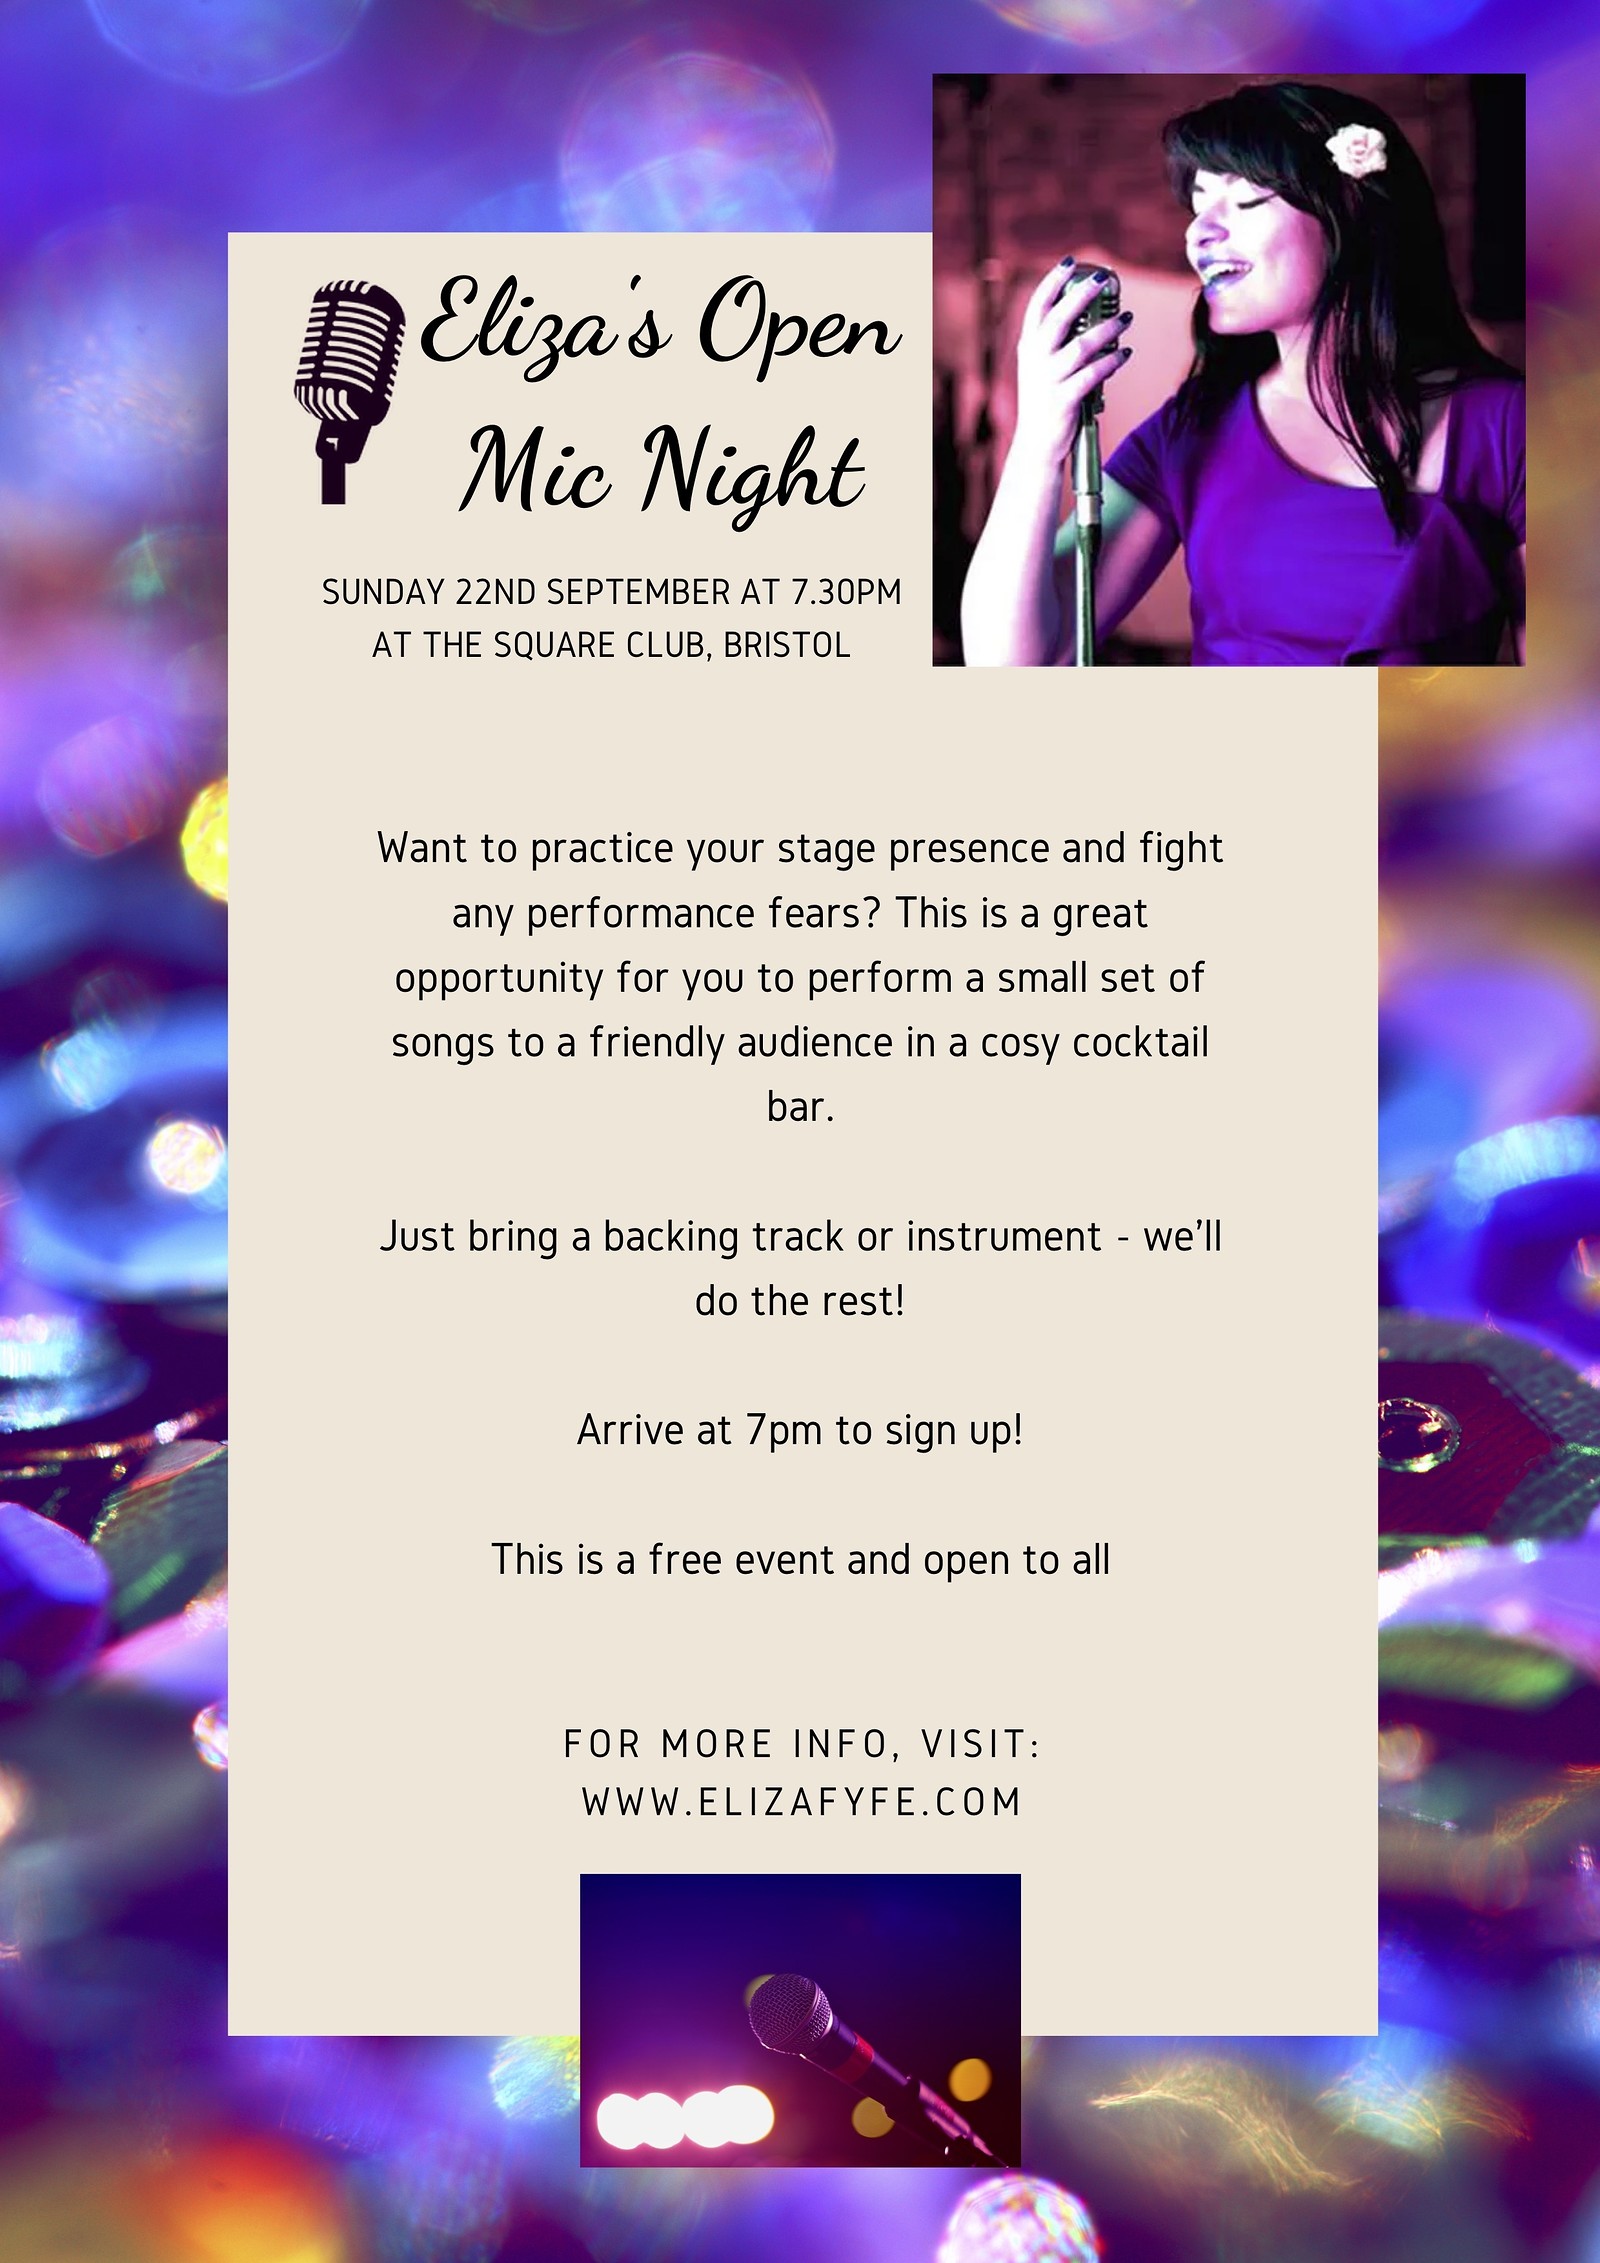 Eliza's Open Mic Night at The Square Club